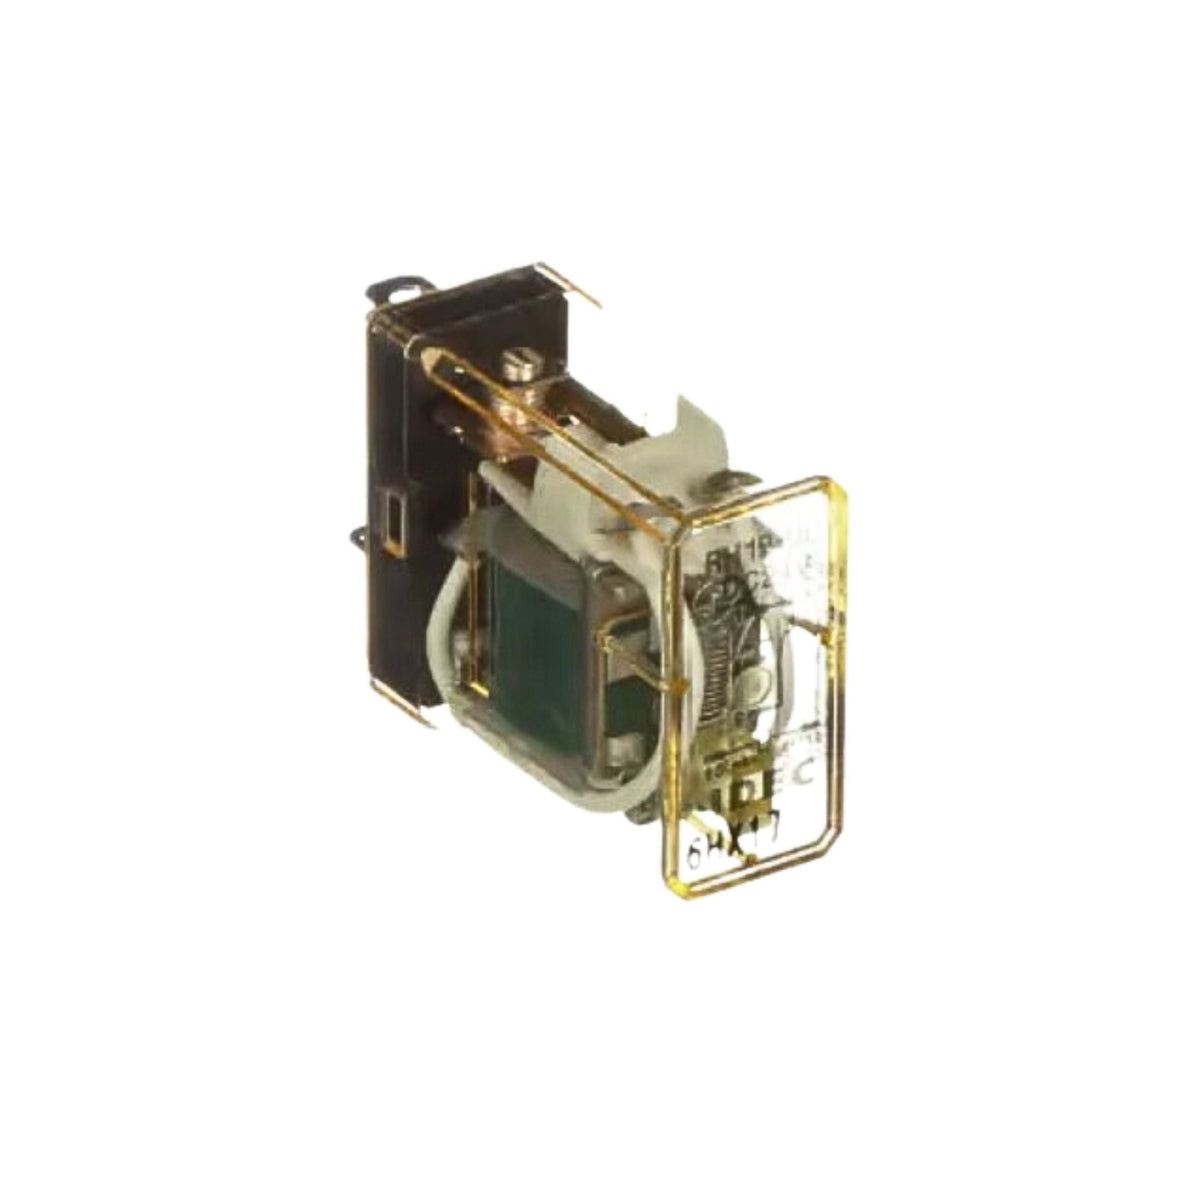 SPDT w/ Light Relay | RH1B-ULDC24V used on Idec product line - Front view